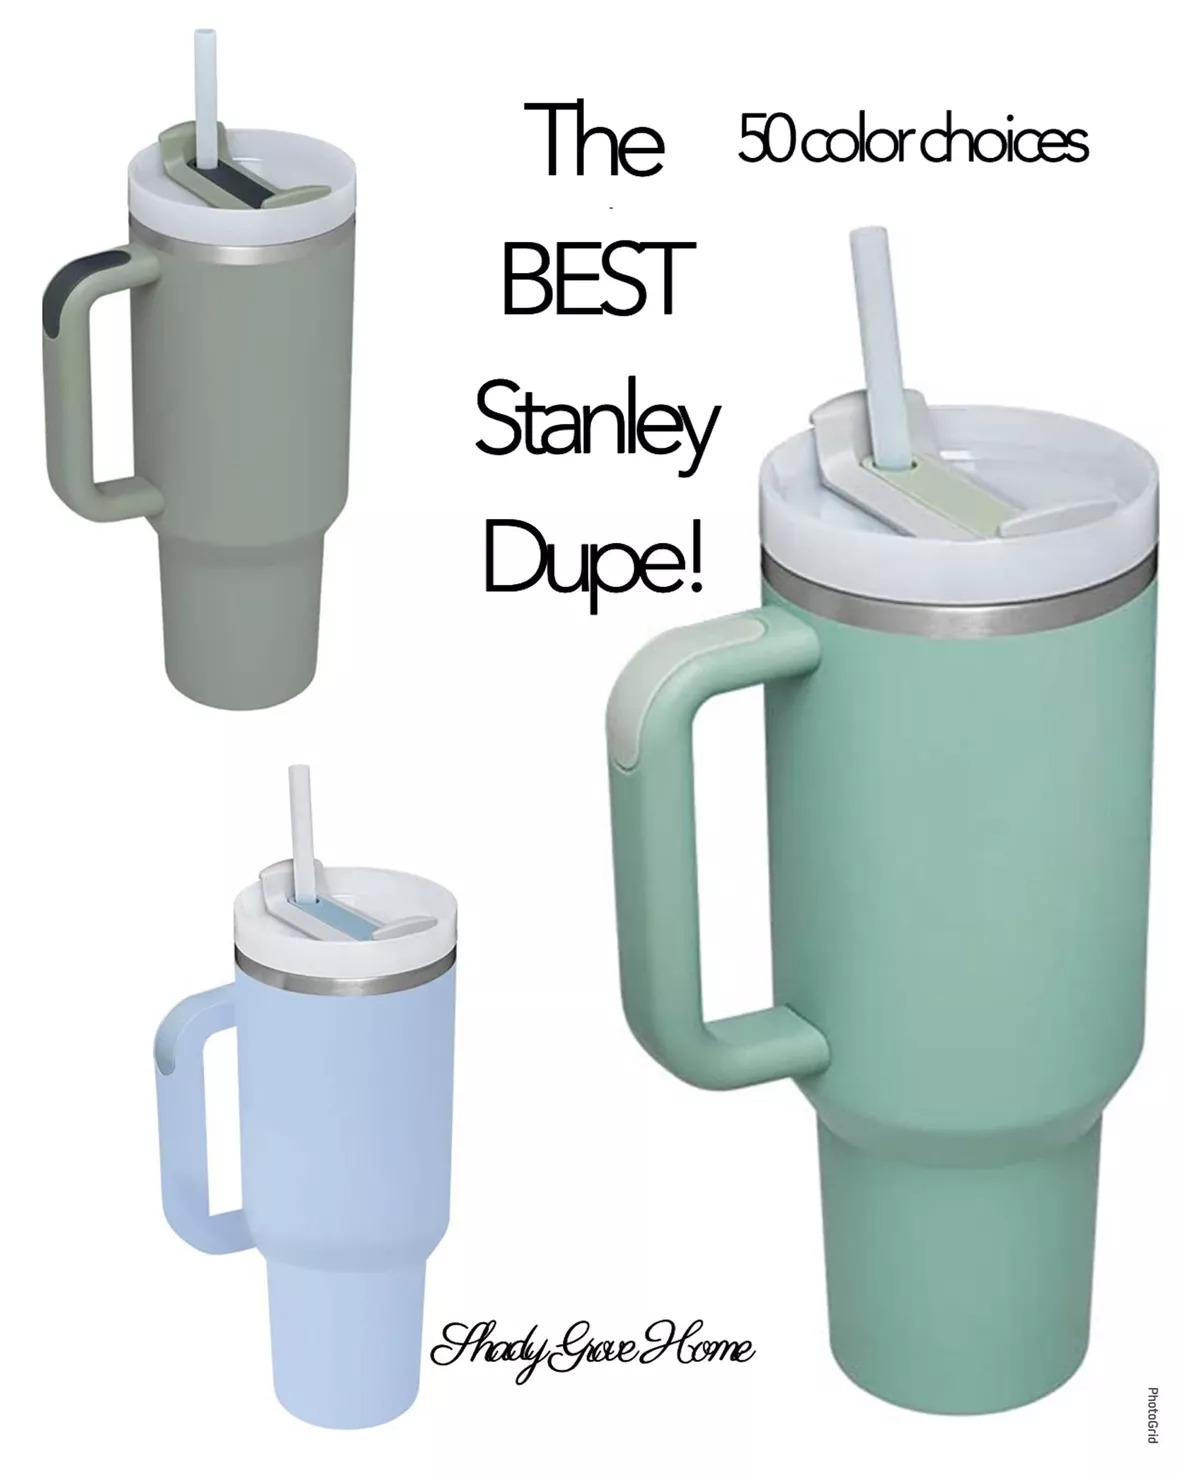 deals: This Stanley 40 oz tumbler dupe is on sale for under $25 